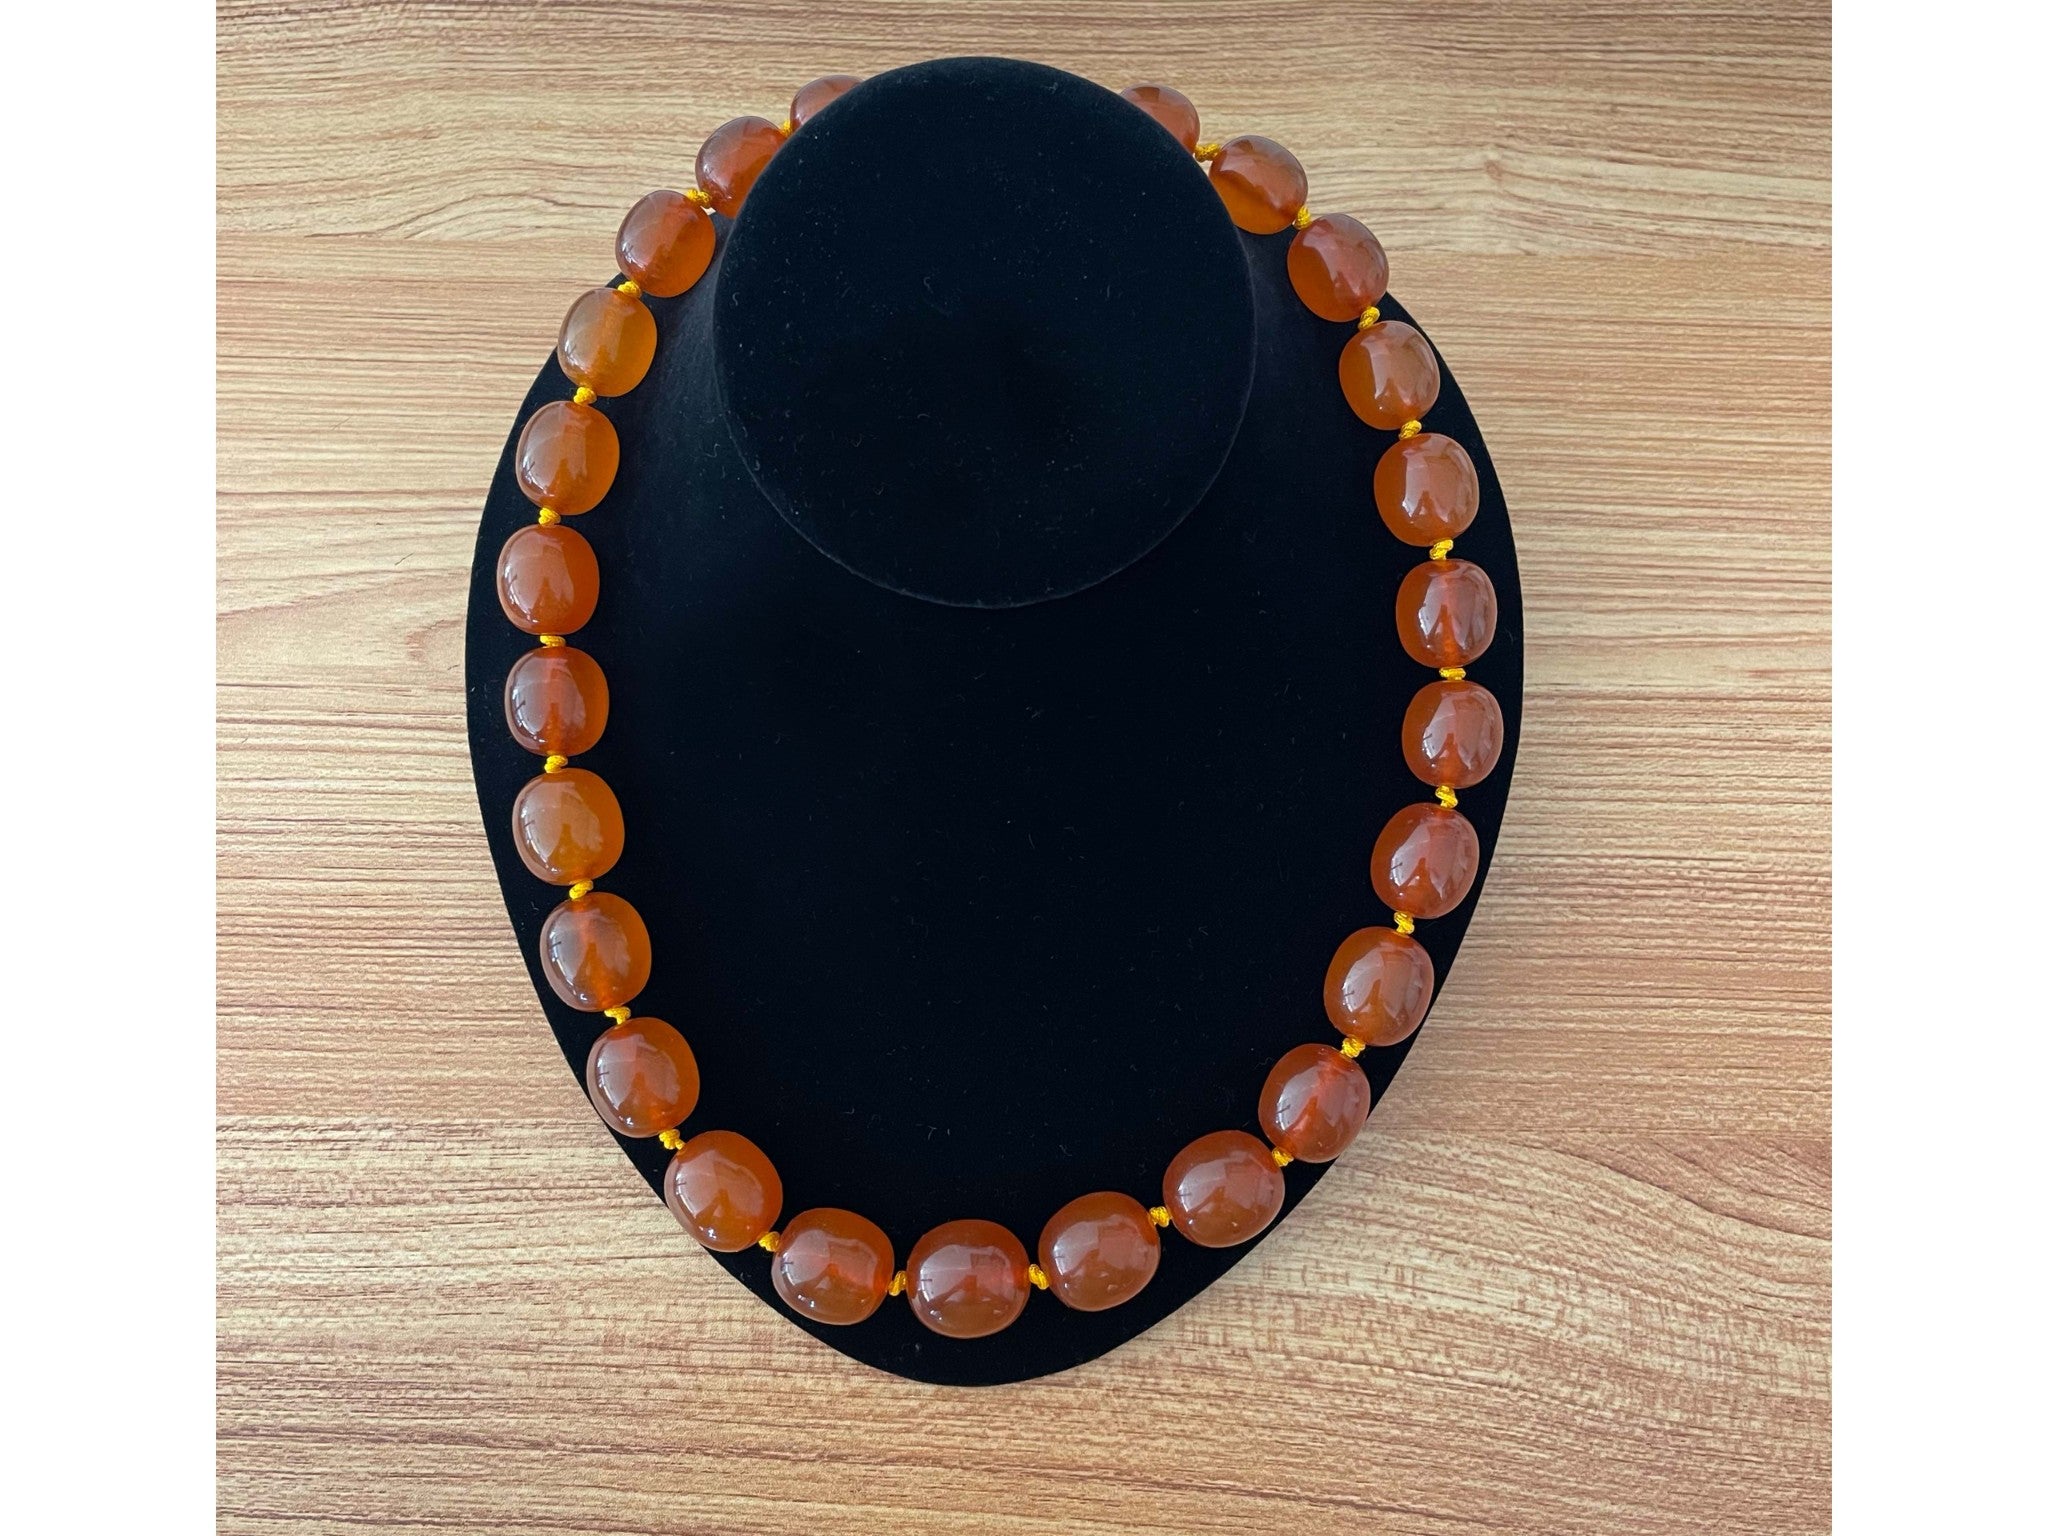 Rare Mings Hawaii Large Amber Bead Strand Necklace 23"